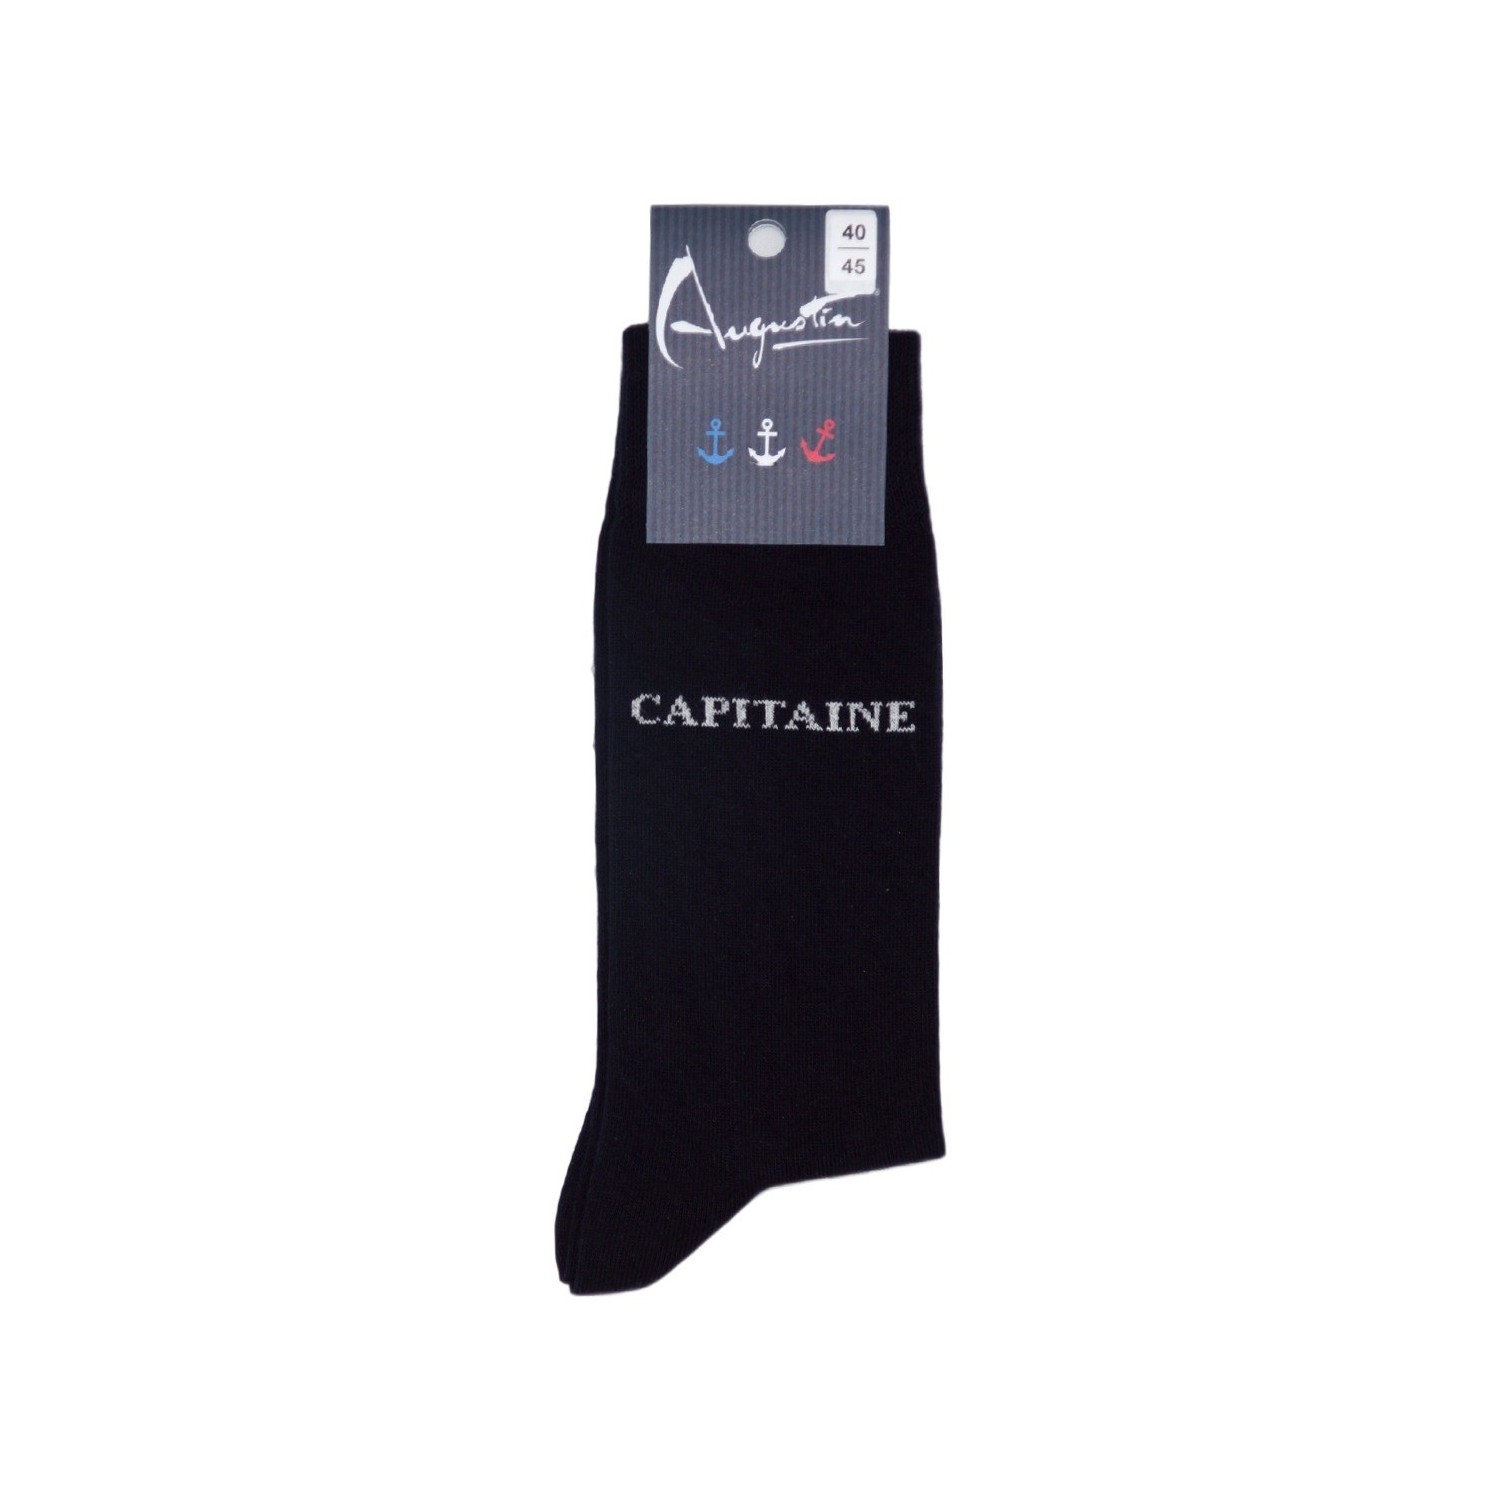 Chaussette capitaine